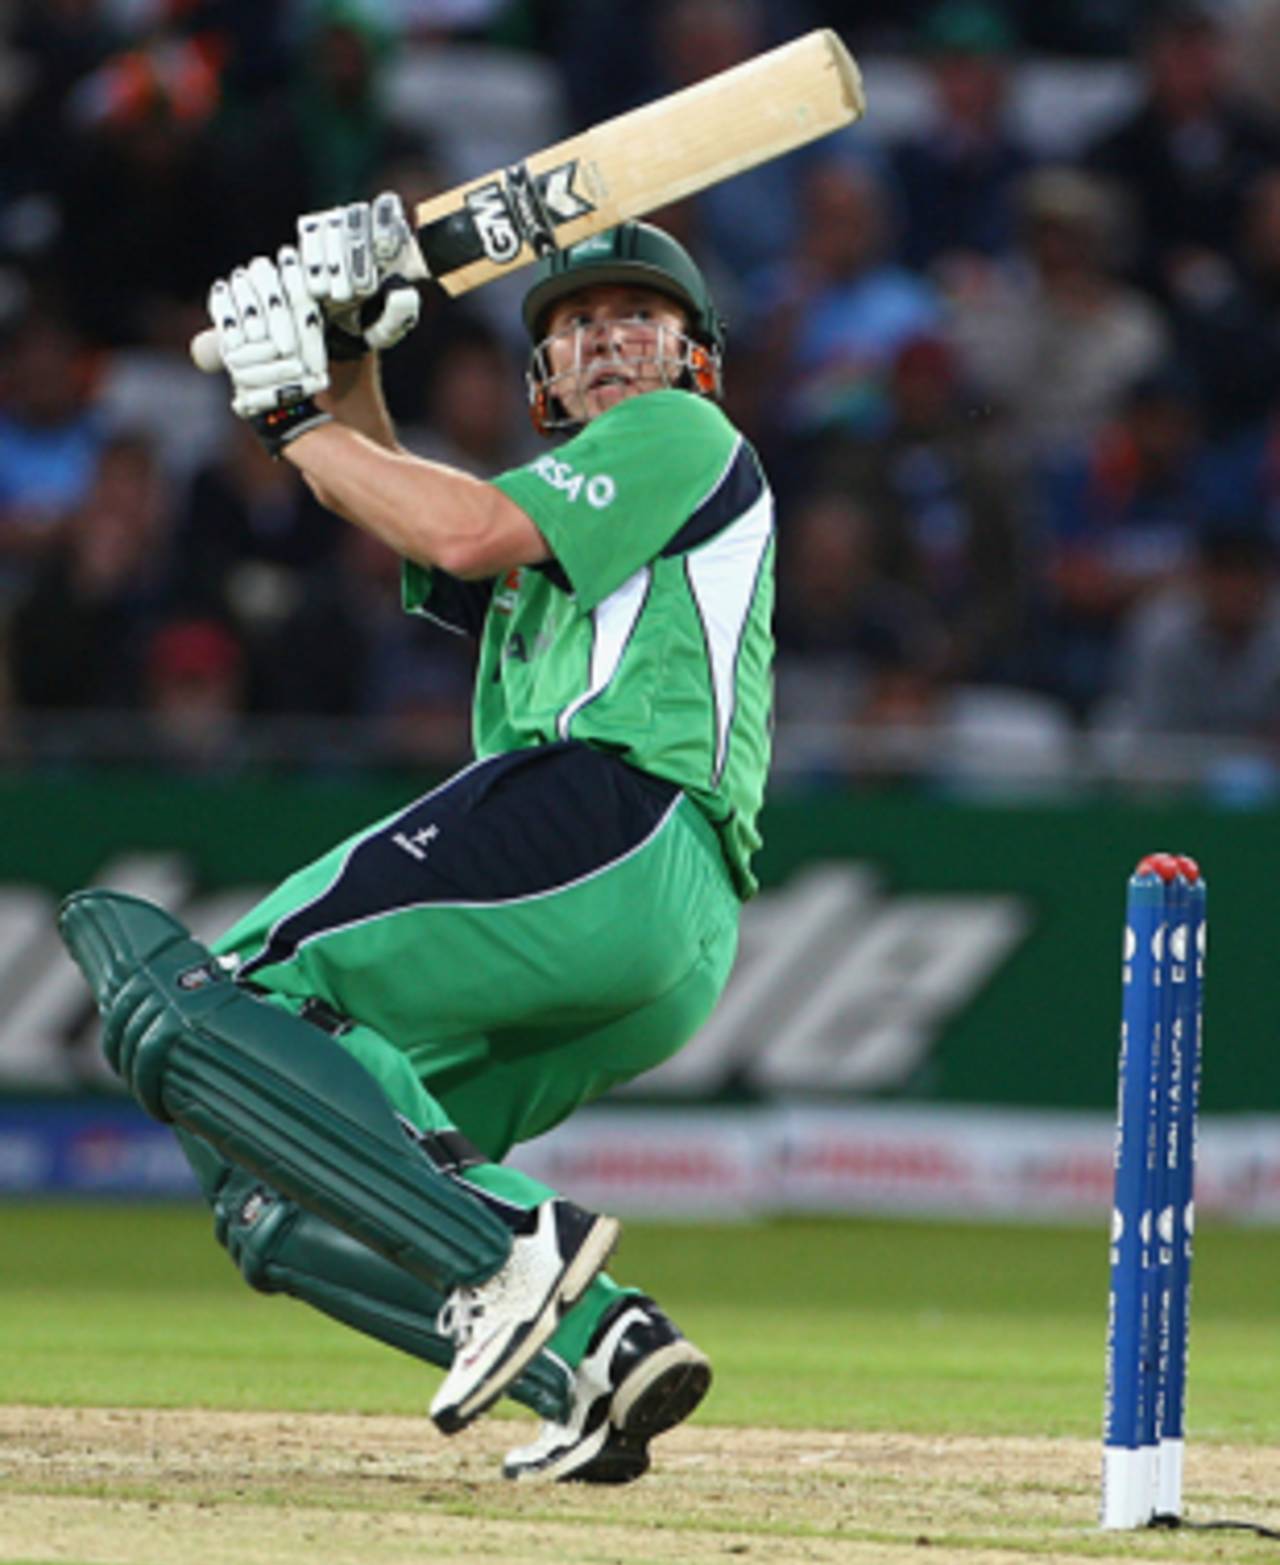 Ireland's only six came in the 16th over when Andrew White top-edged a pull over the boundary&nbsp;&nbsp;&bull;&nbsp;&nbsp;Getty Images